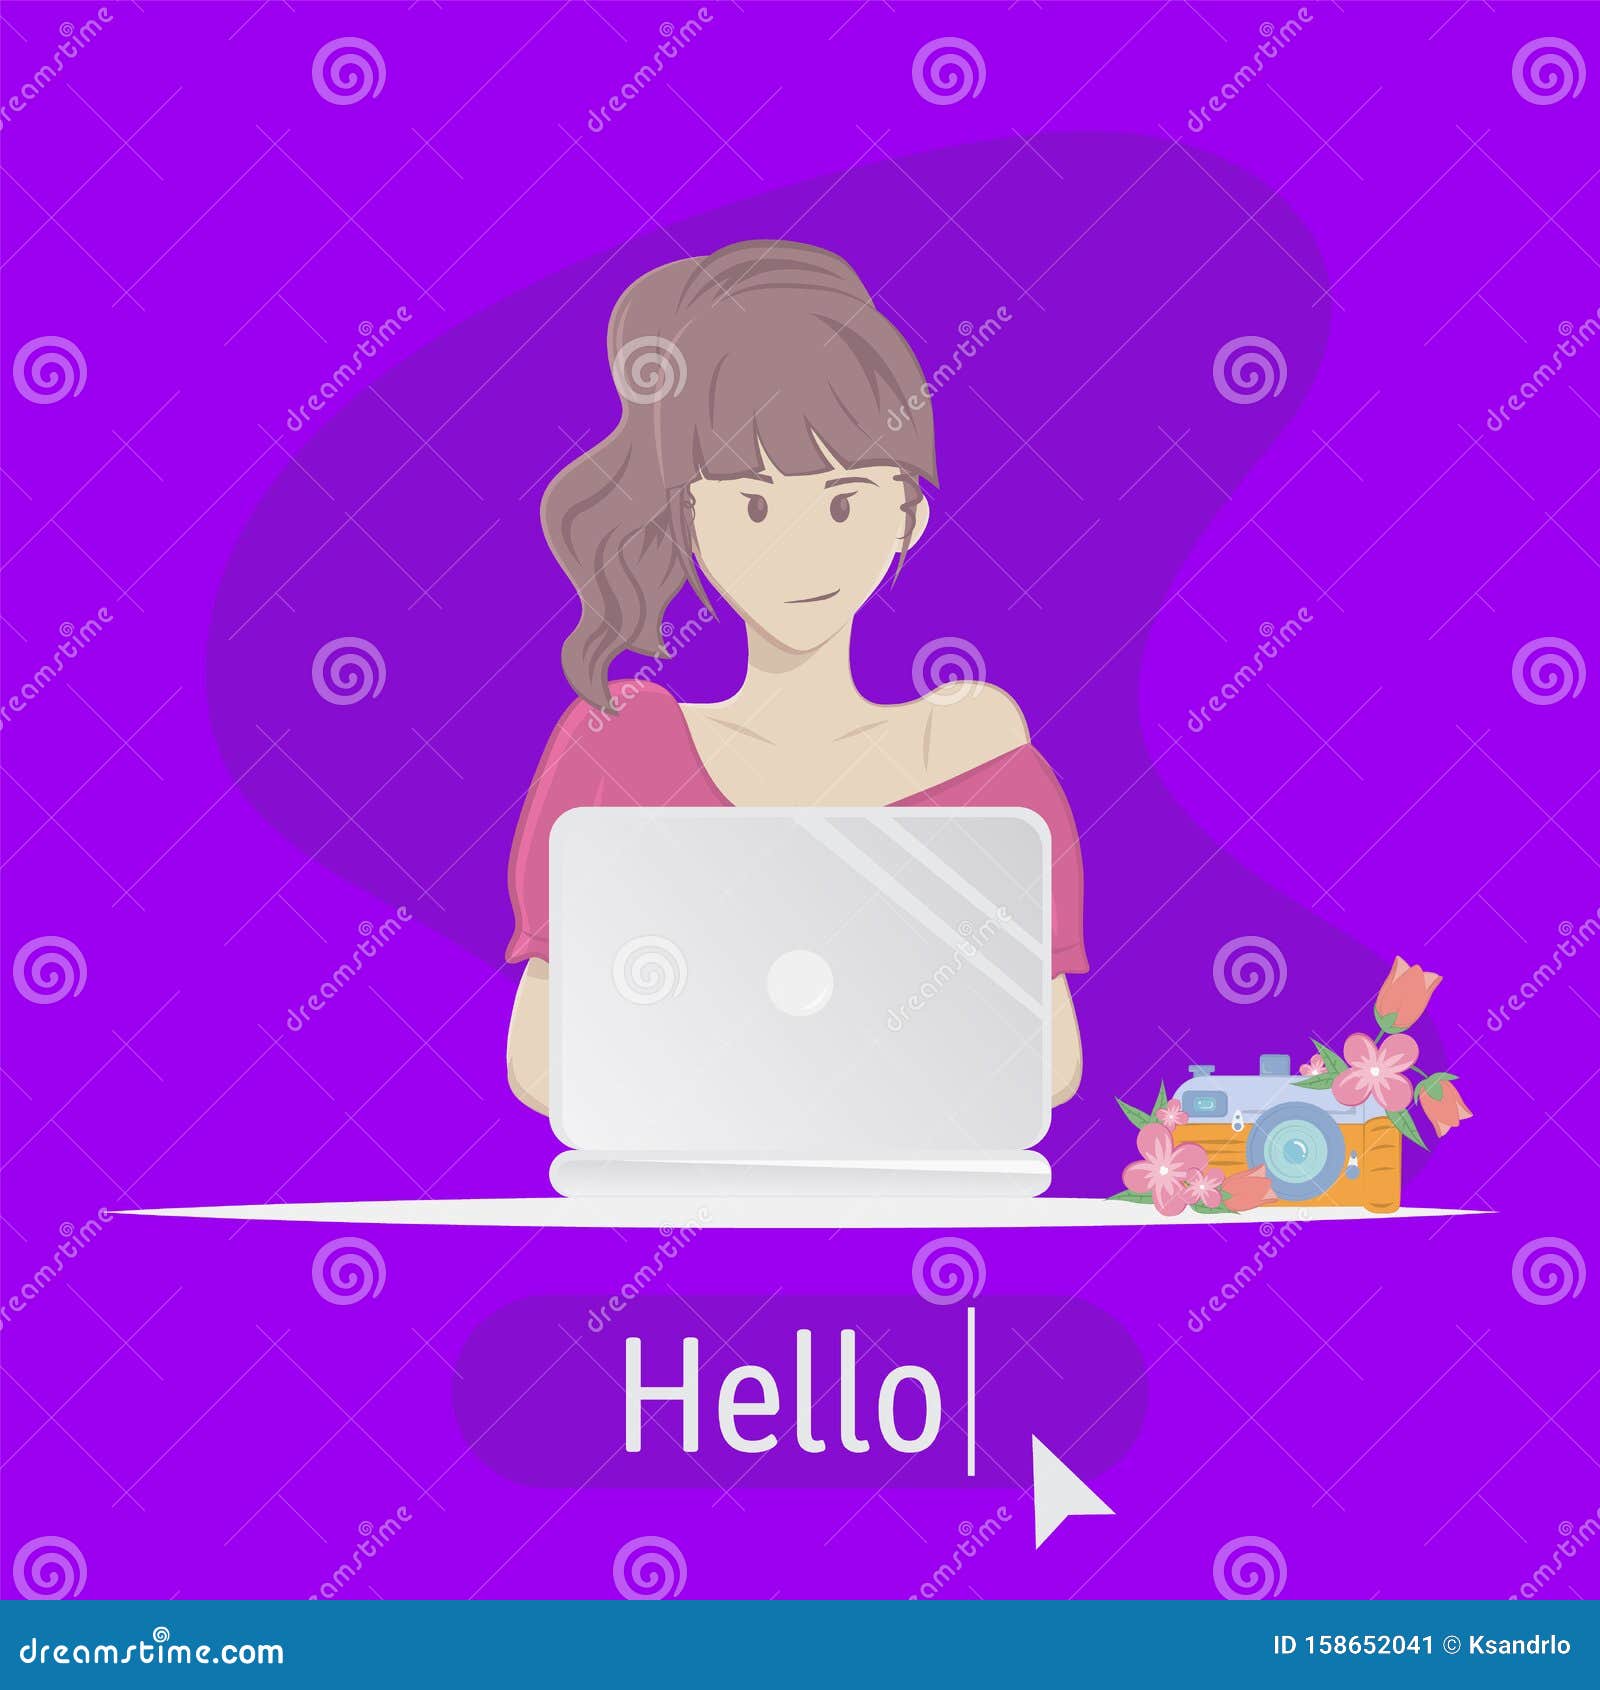 Avatar woman with laptop design Royalty Free Vector Image